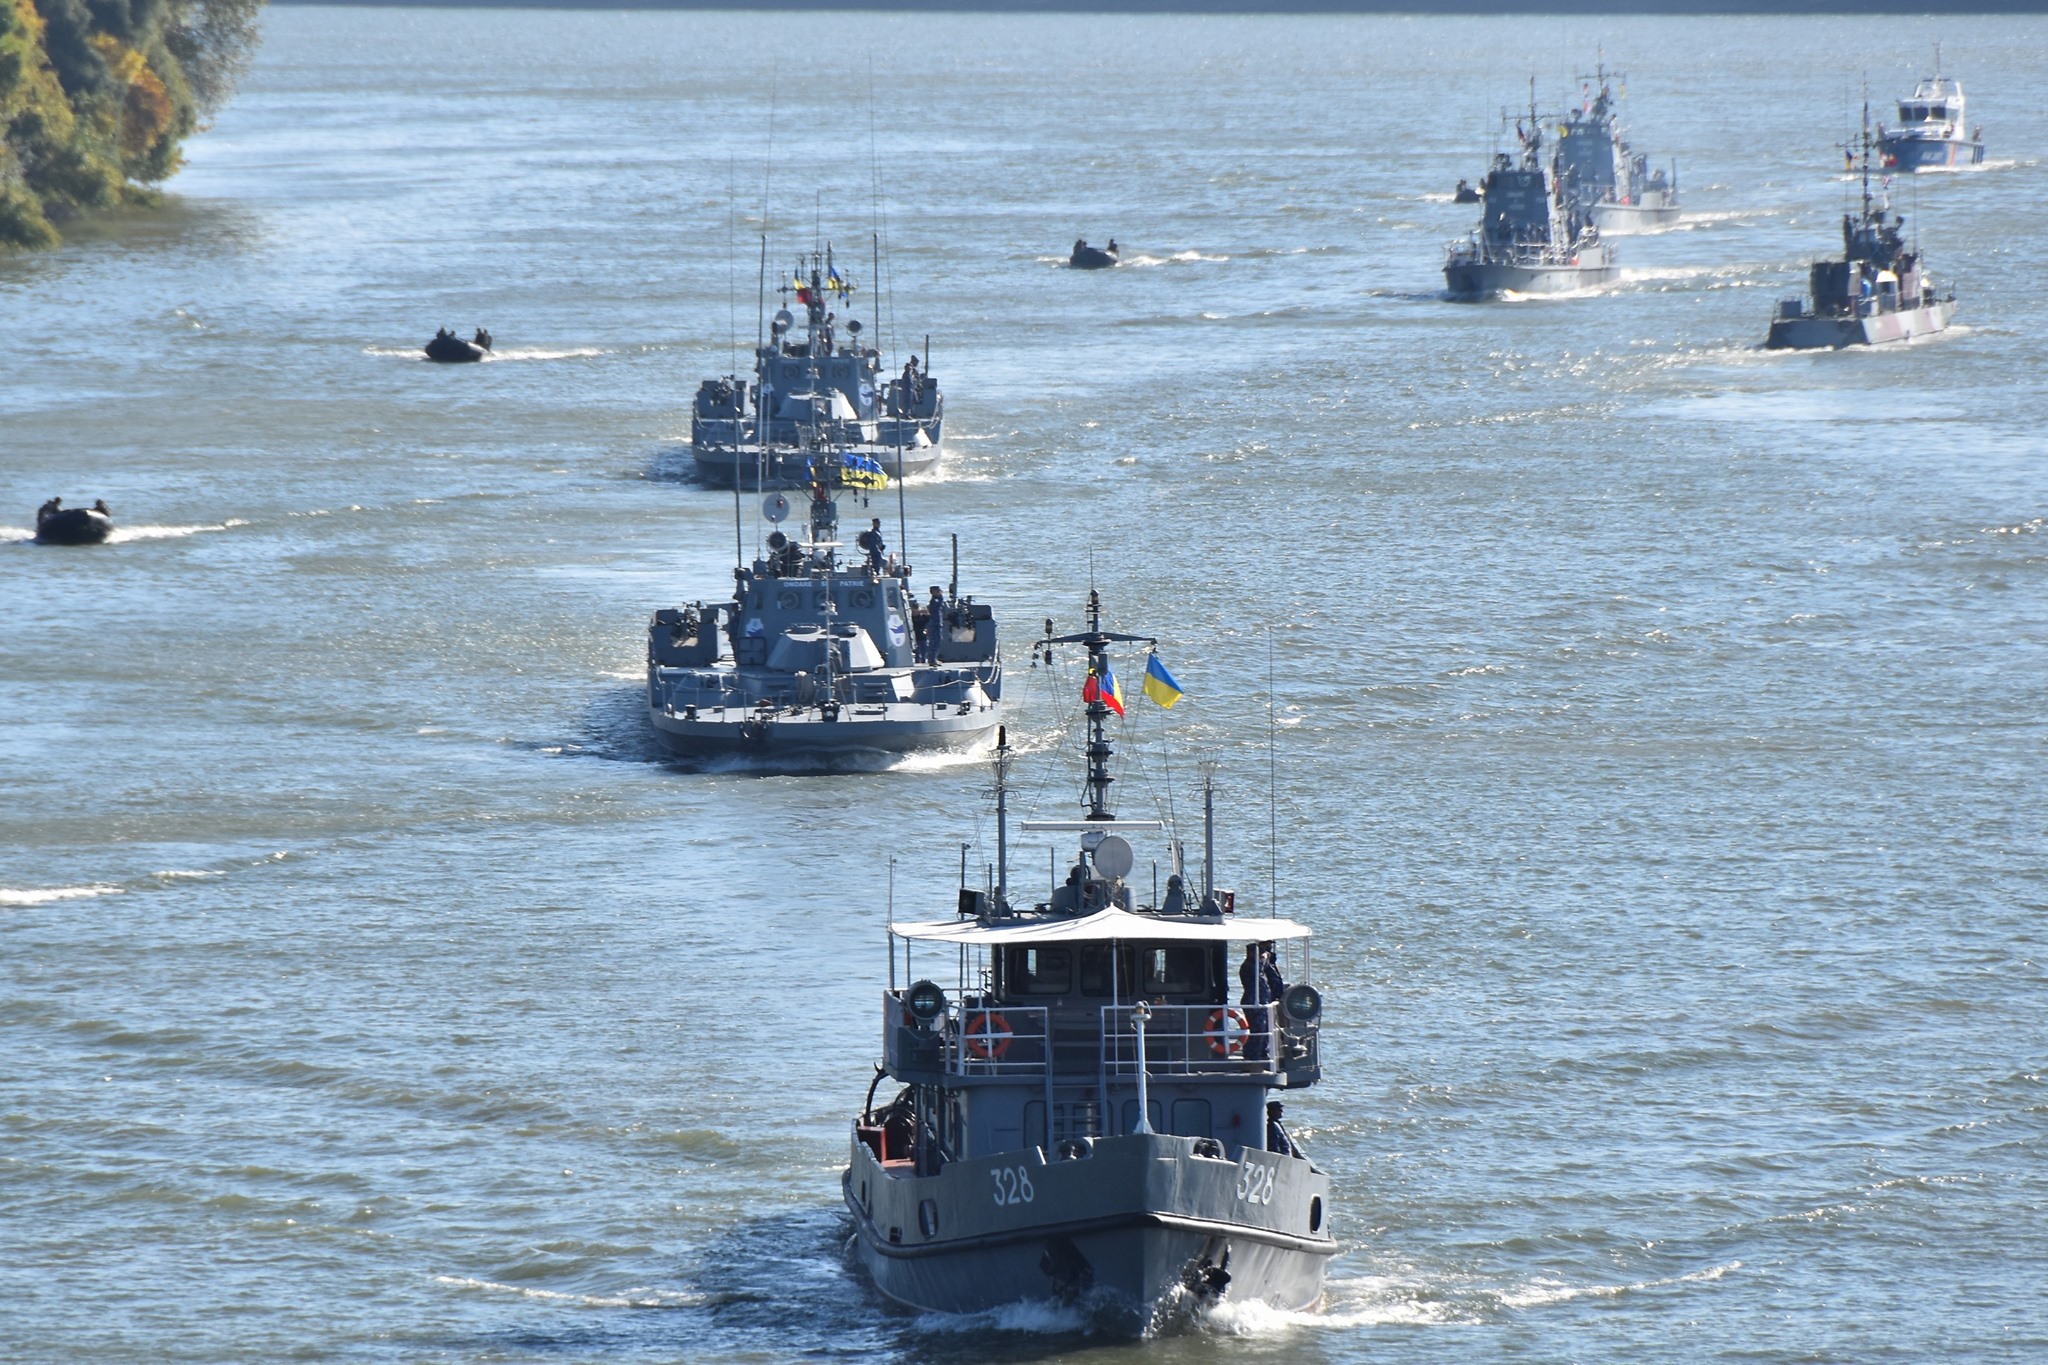 Ukraine closes inland waters to Russian ships